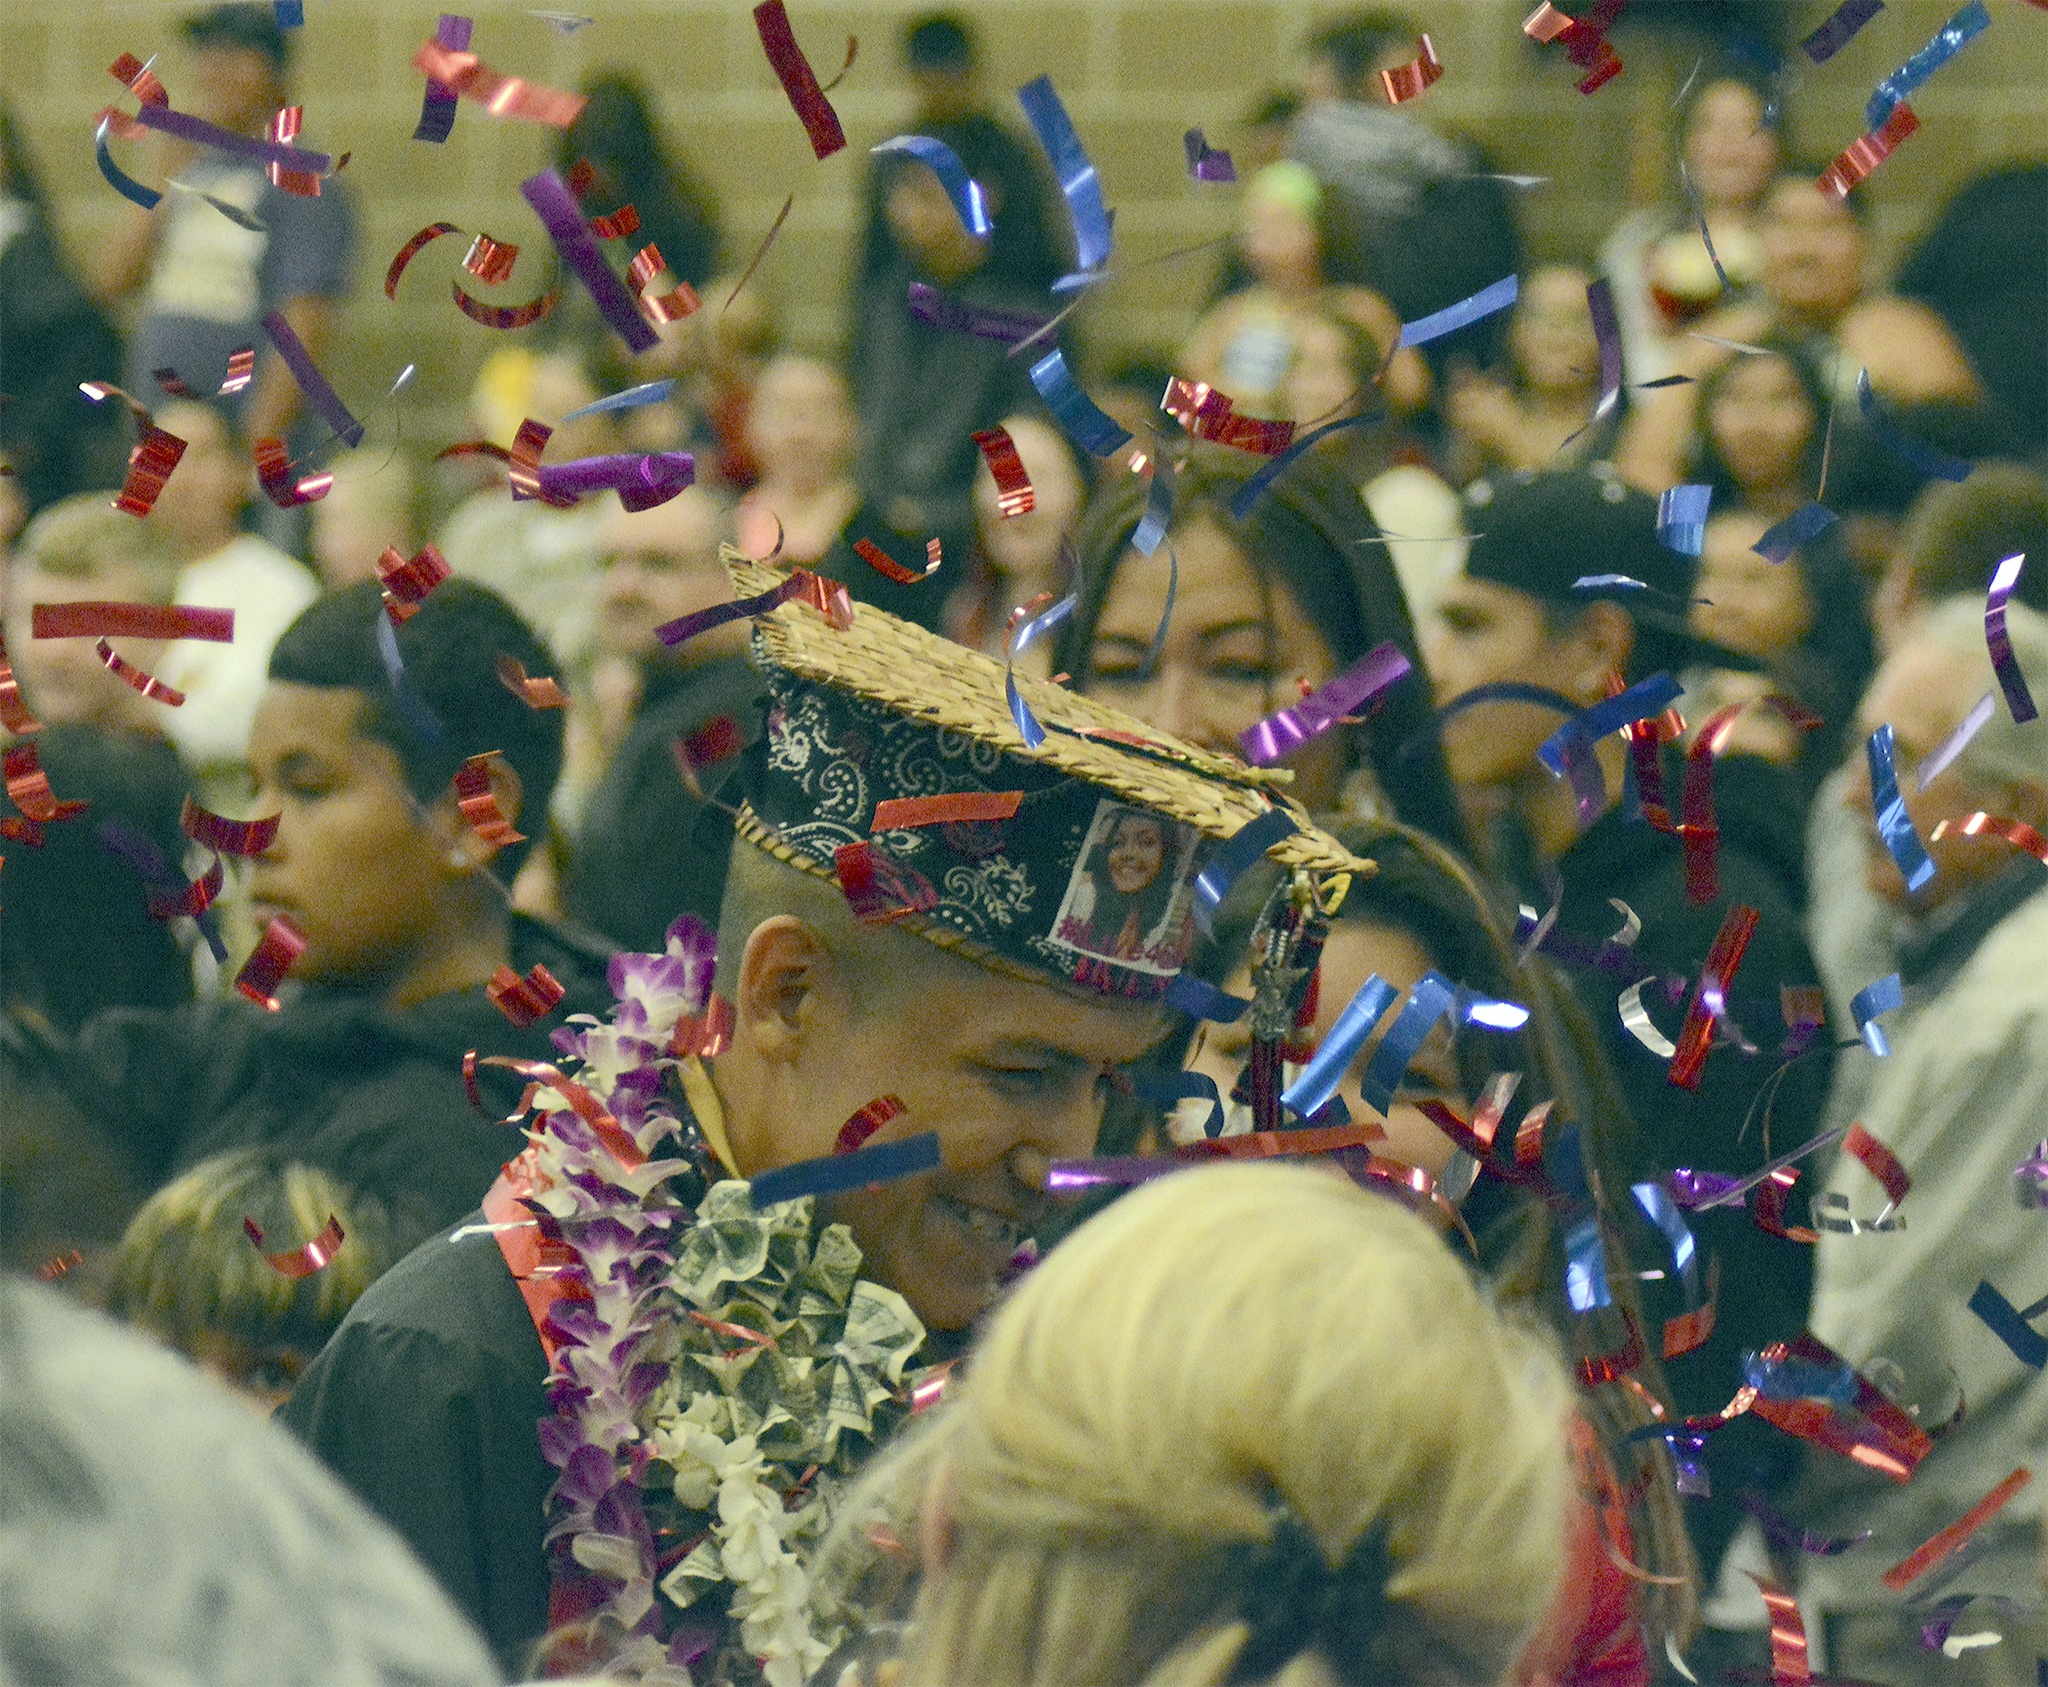 Many Tulalip graduates were not spared from confetti during Heritage High School’s graduation June 14.